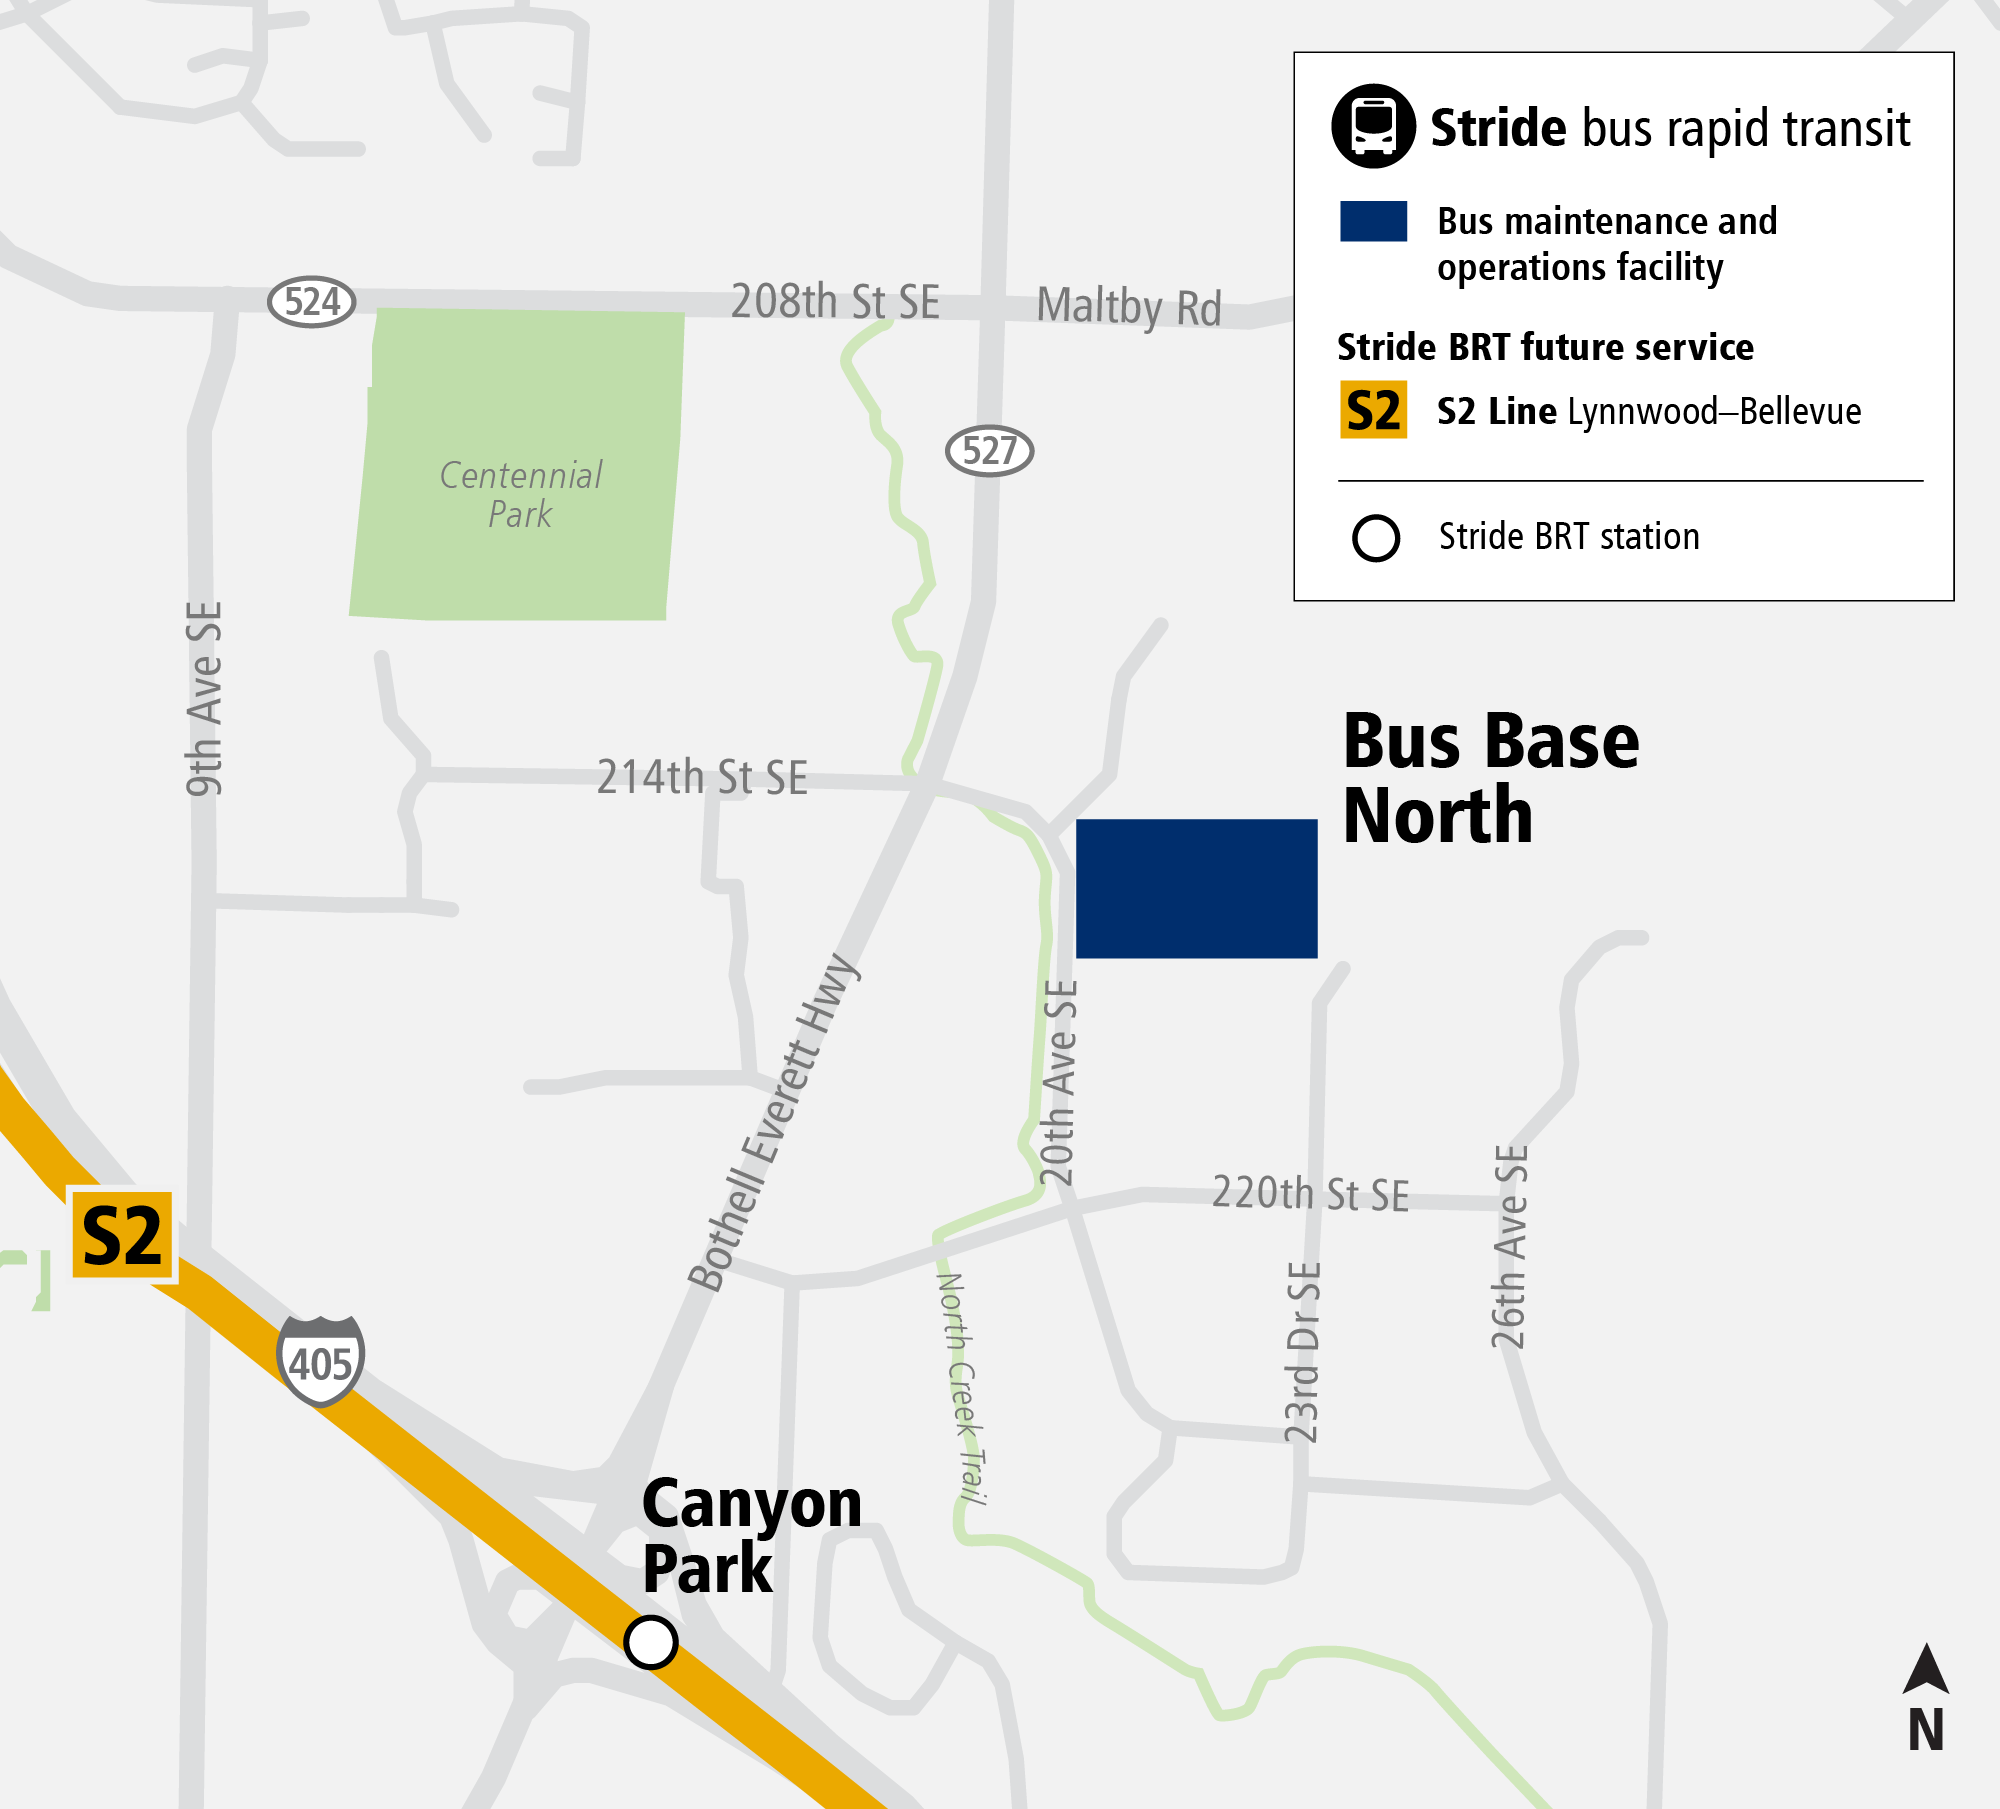 area map showing the Bus Base North facility location in the City of Bothell, Canyon Park subarea